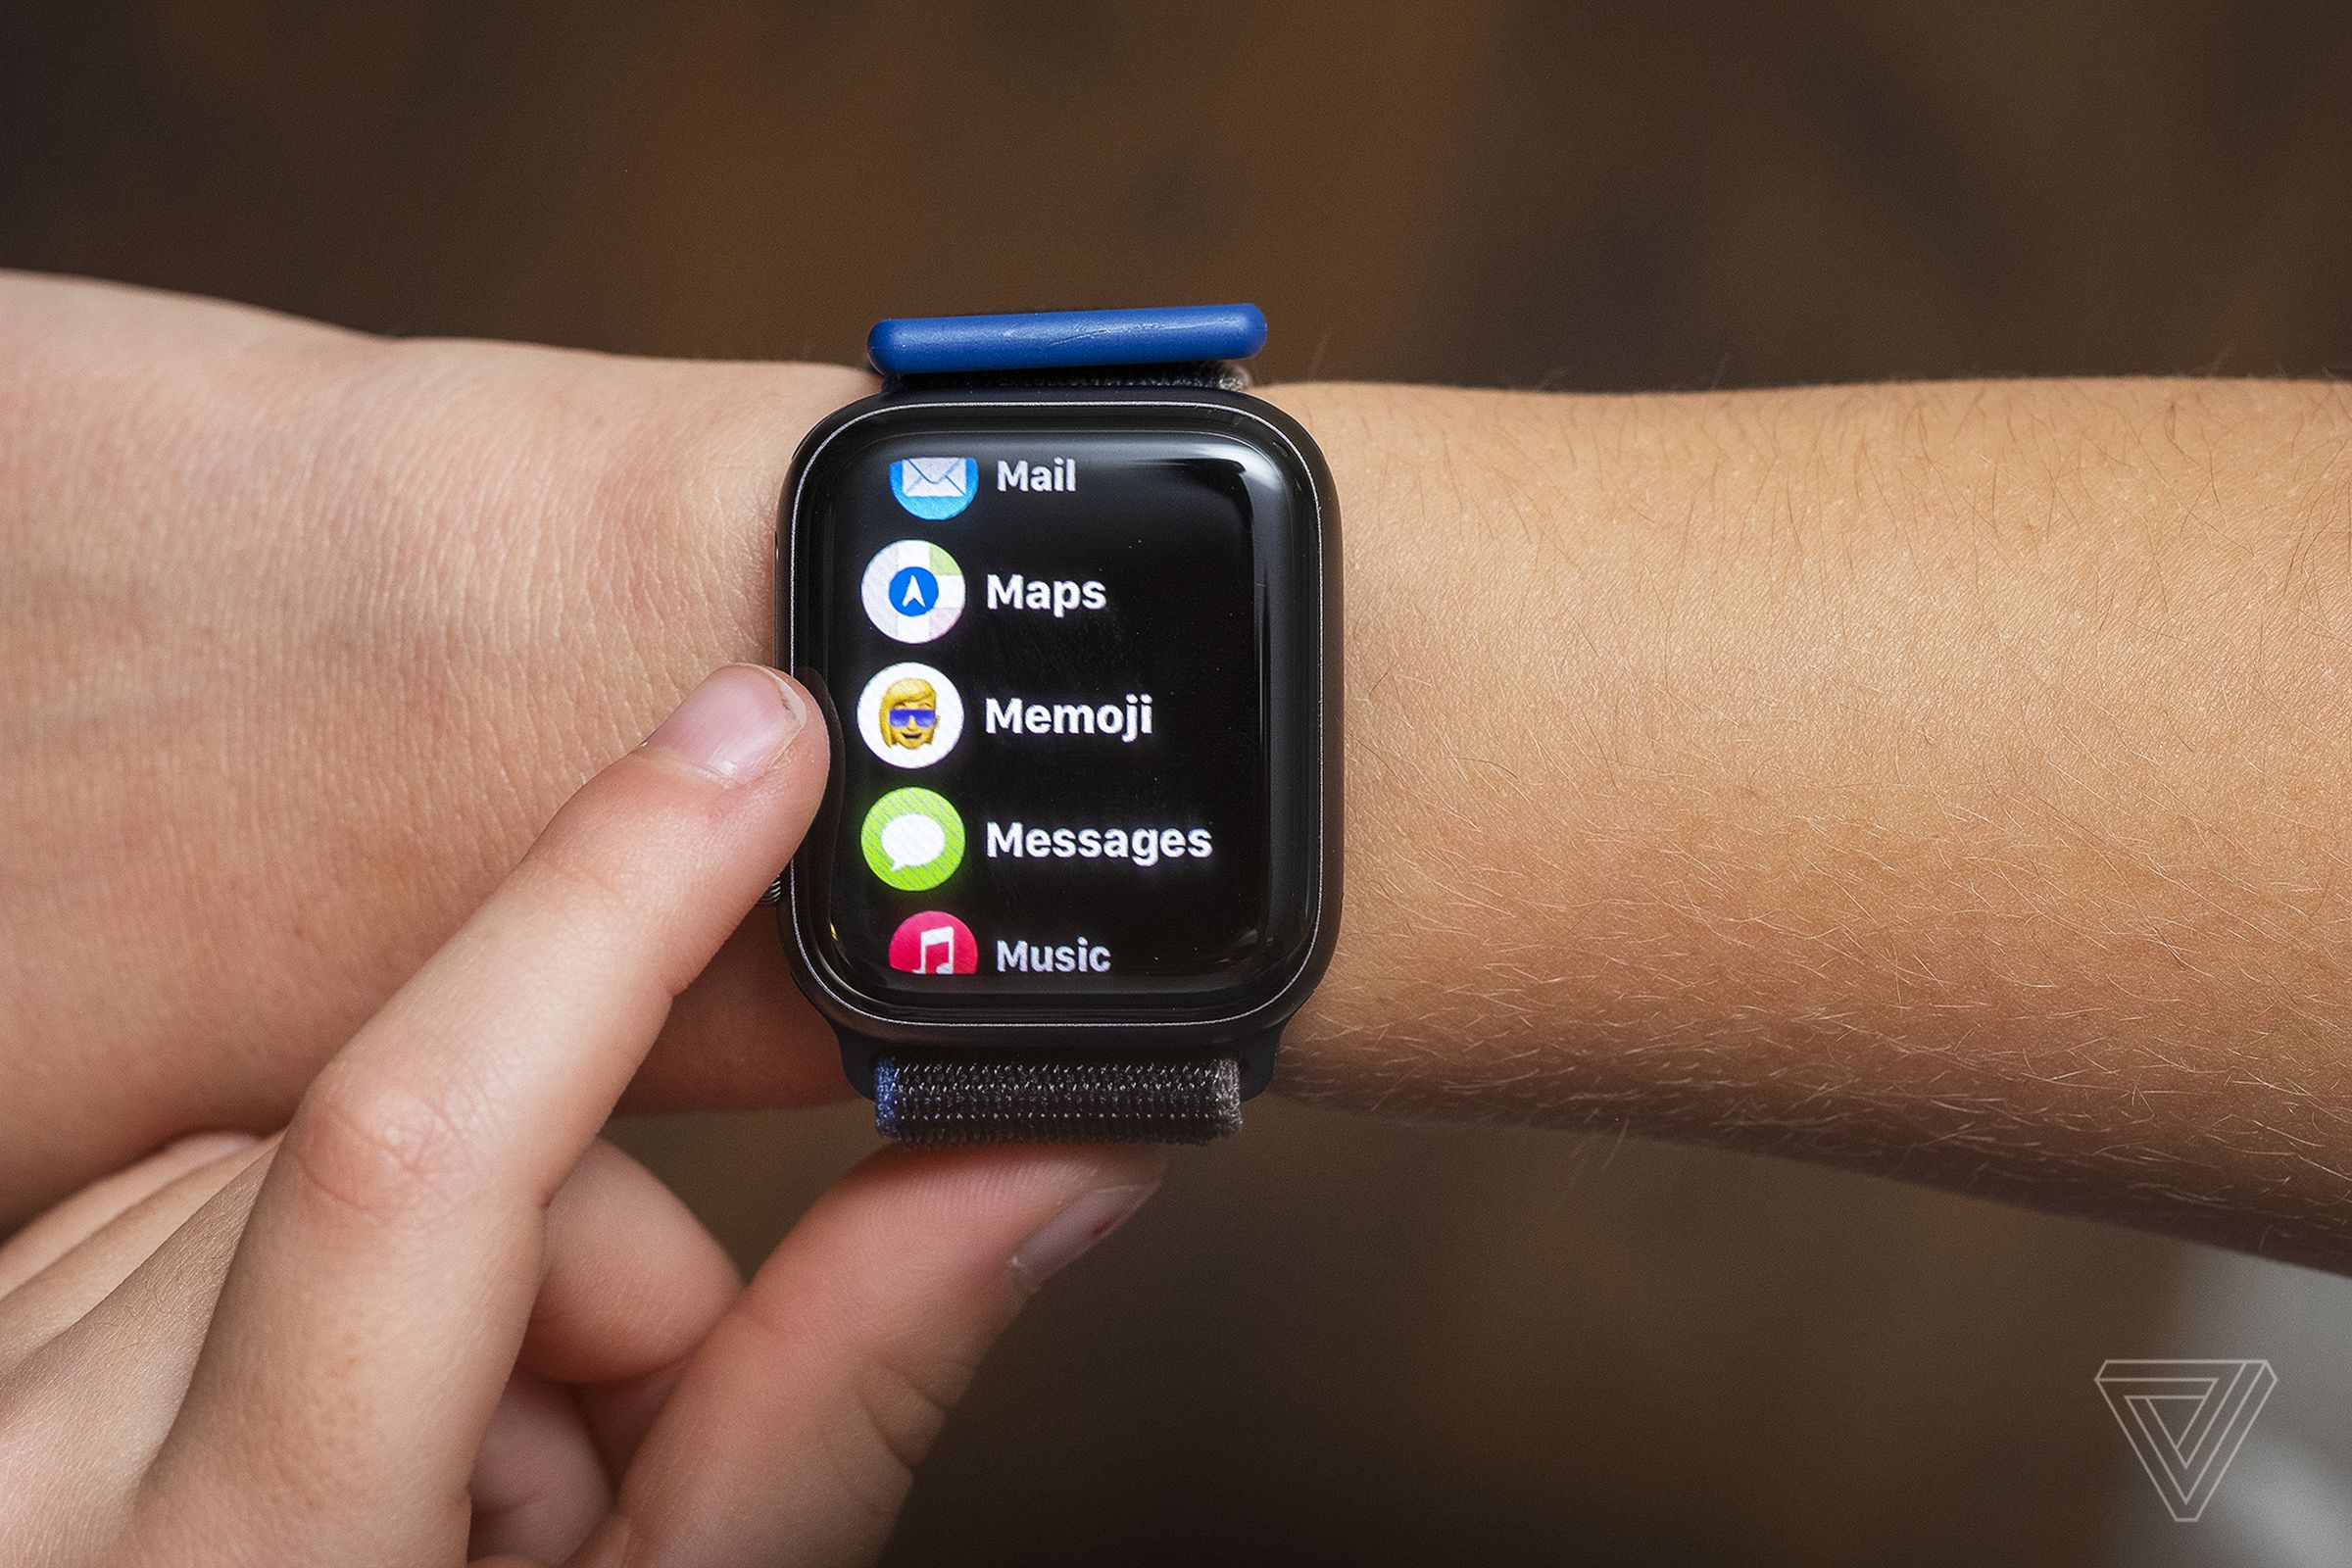 Family Setup still allows for most of the Apple Watch’s functions.